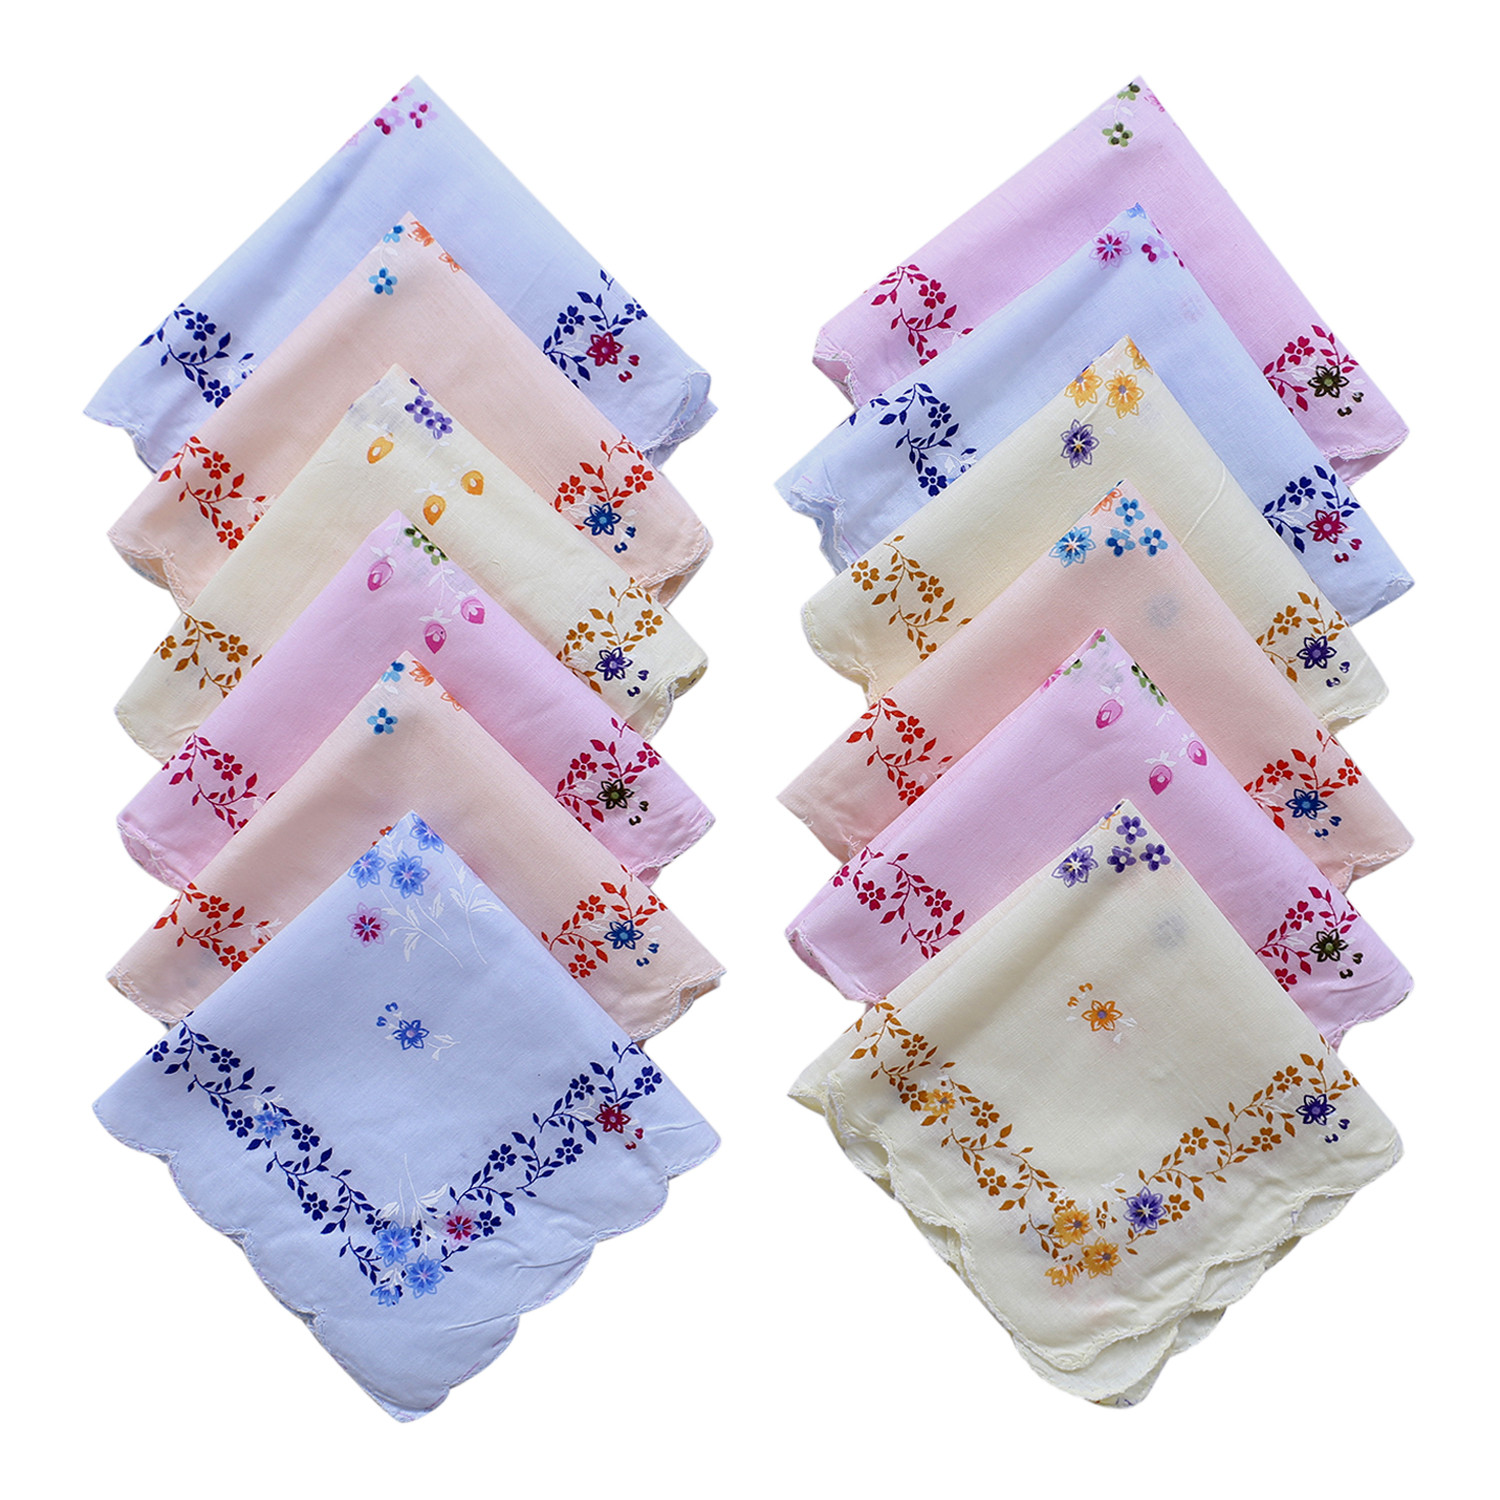 Kuber Industries Handkerchiefs|Leaf Print Cutwork Soft Cotton Hankies For Woman,Girls & Wicking Sweat from Hands,Face,Set of 12 (Multicolor)